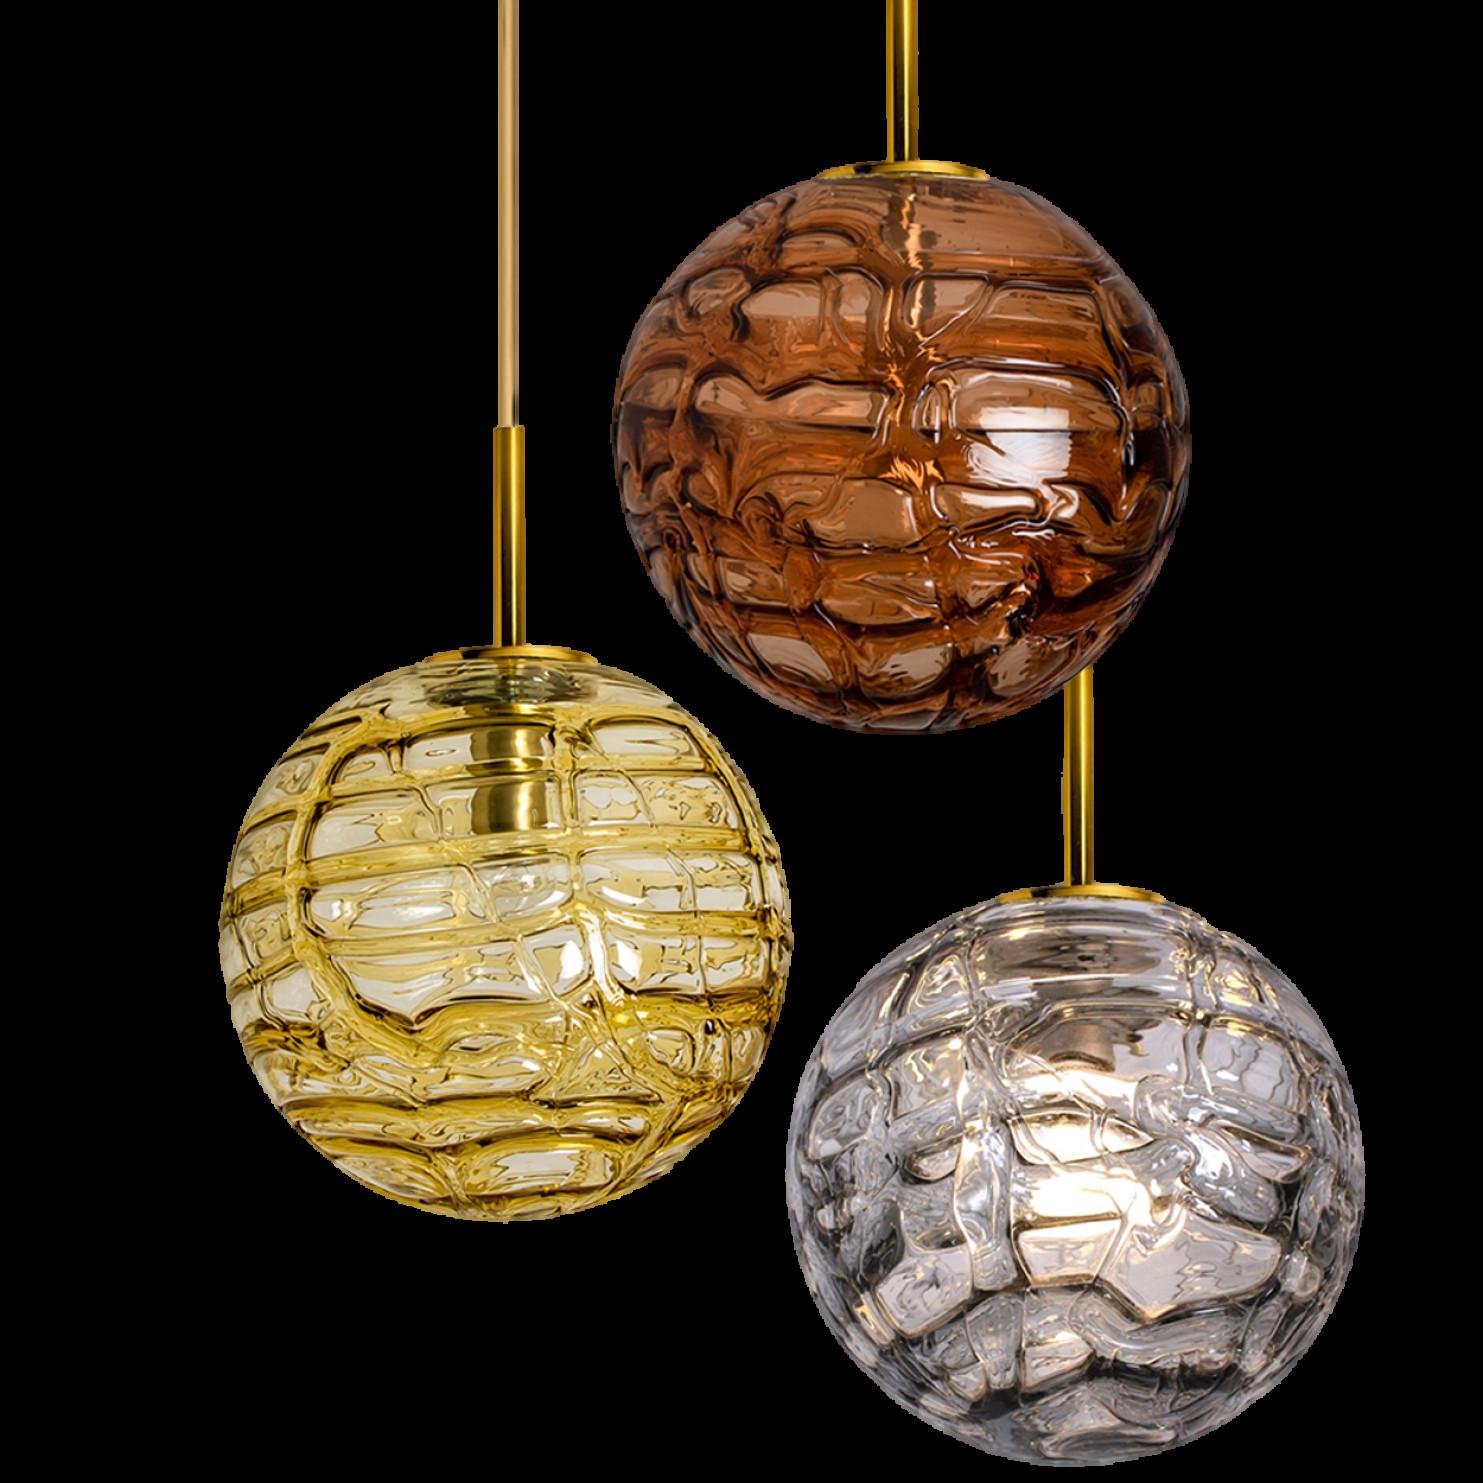 1 of the 3 Doria Leuchten globes (in collaboration with Murano) in the style of Venini, manufactured, circa 1960. Real statement piece.

High-end thick Murano crystal glass shades made out of overlay glasses in the color warm honey/amber yellow